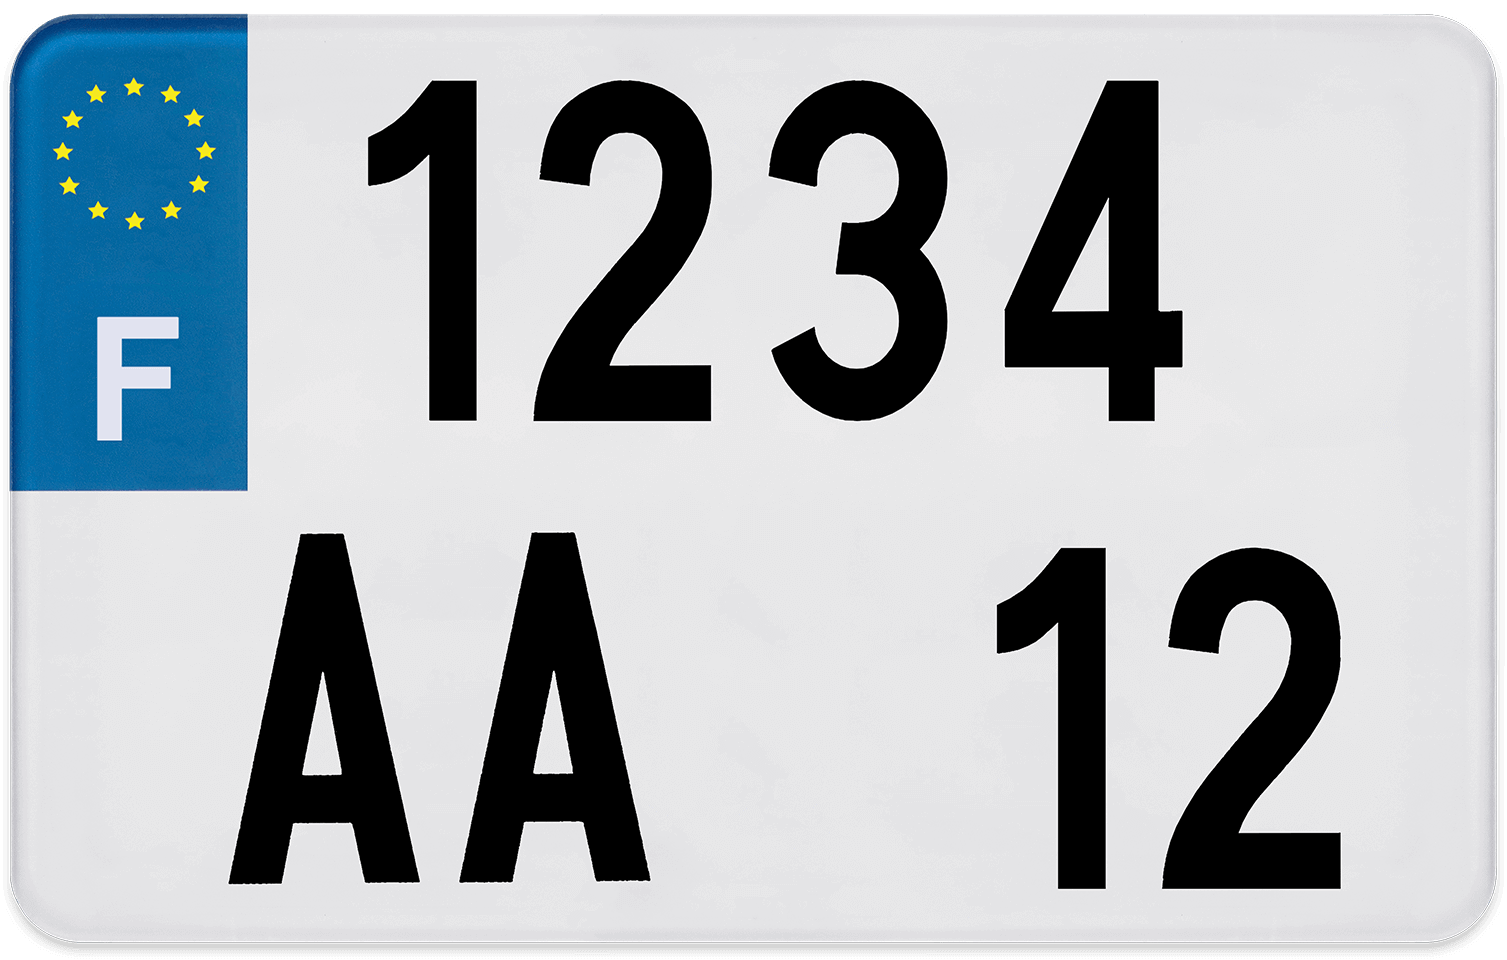 File:Plaque d'immatriculation MOTO 210x130.png - Wikimedia Commons